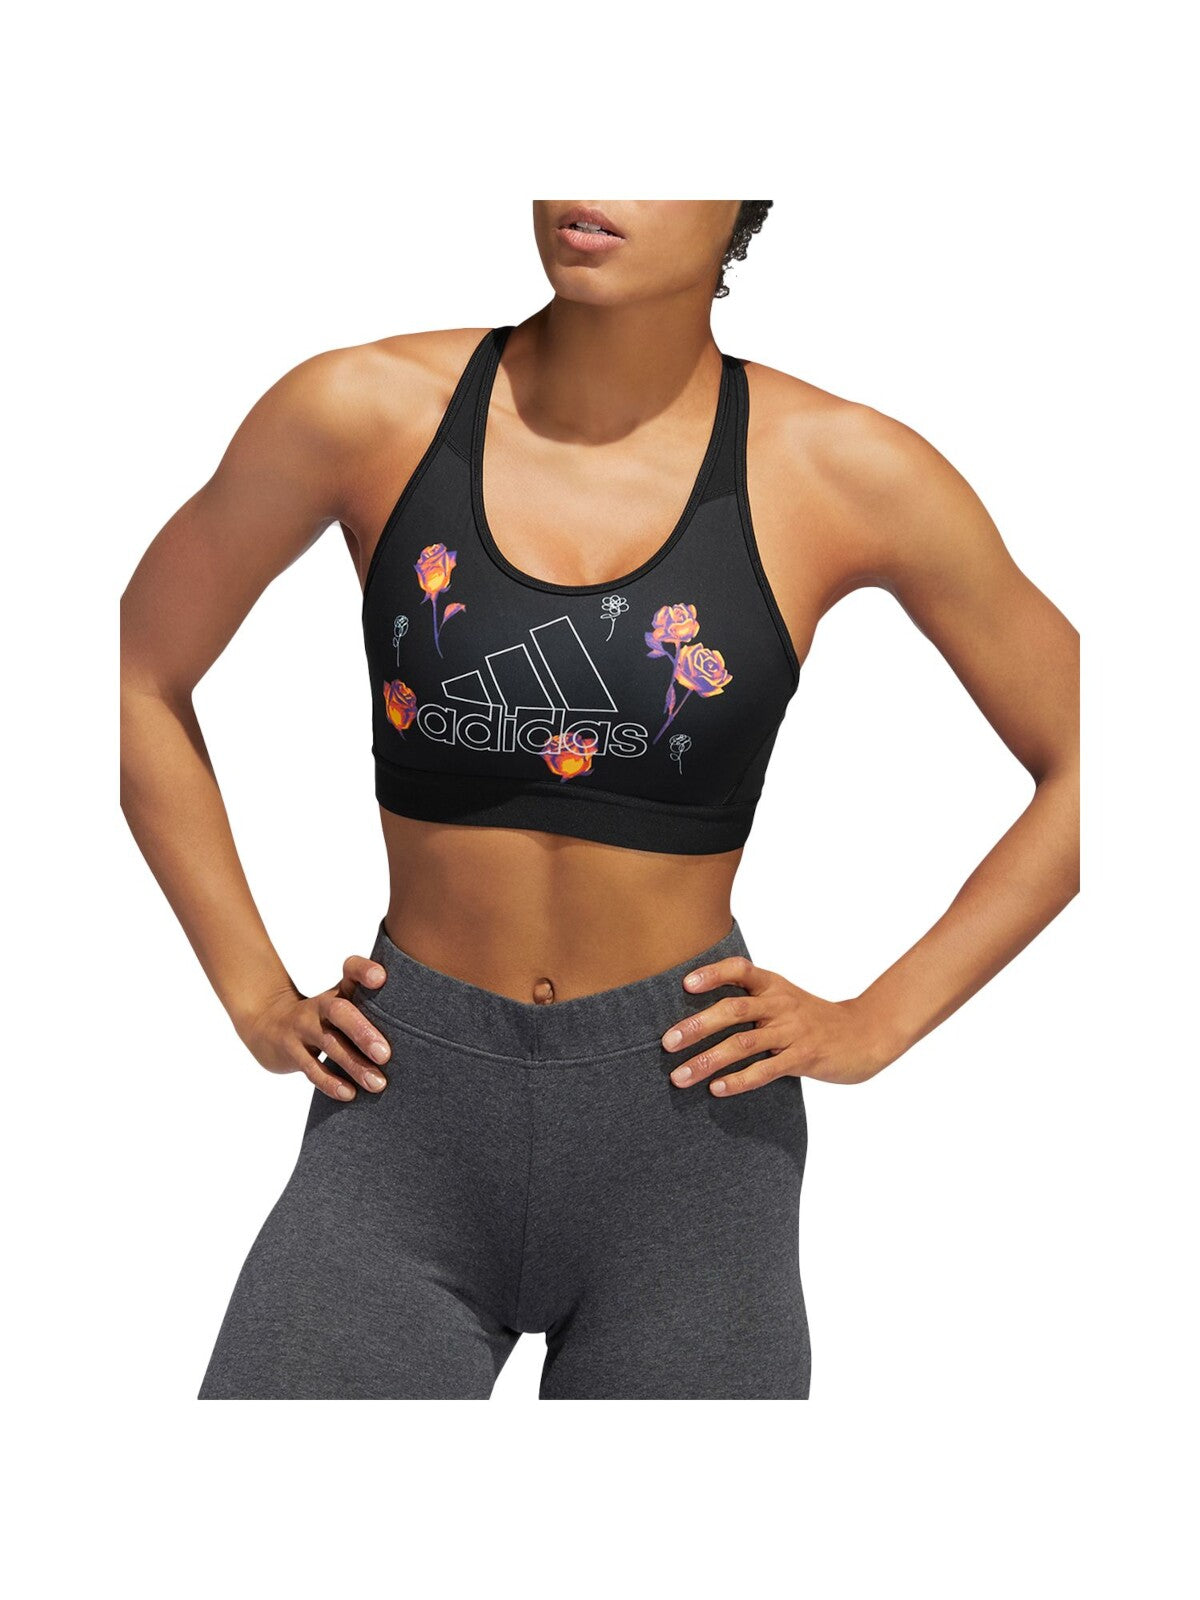 ADIDAS Intimates Black Mesh Back Removable Cups Floral Sports Bra XS